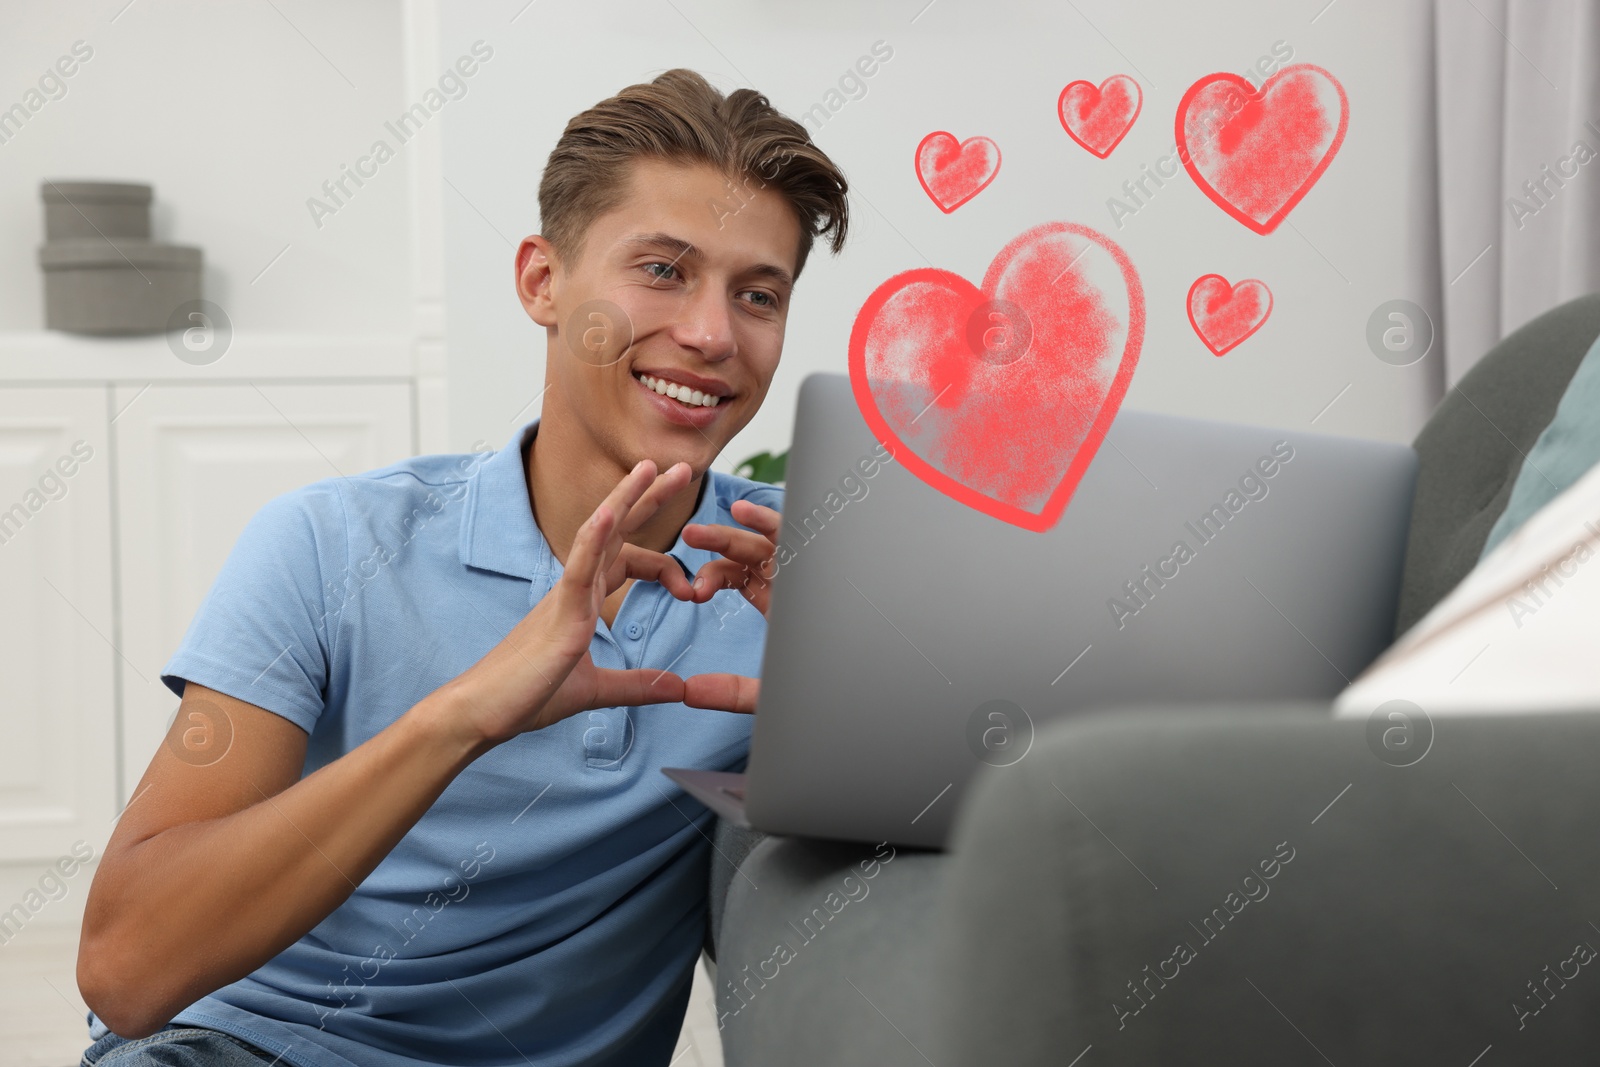 Image of Long distance relationship. Young man having video chat with his loved one indoors. Red hearts near him